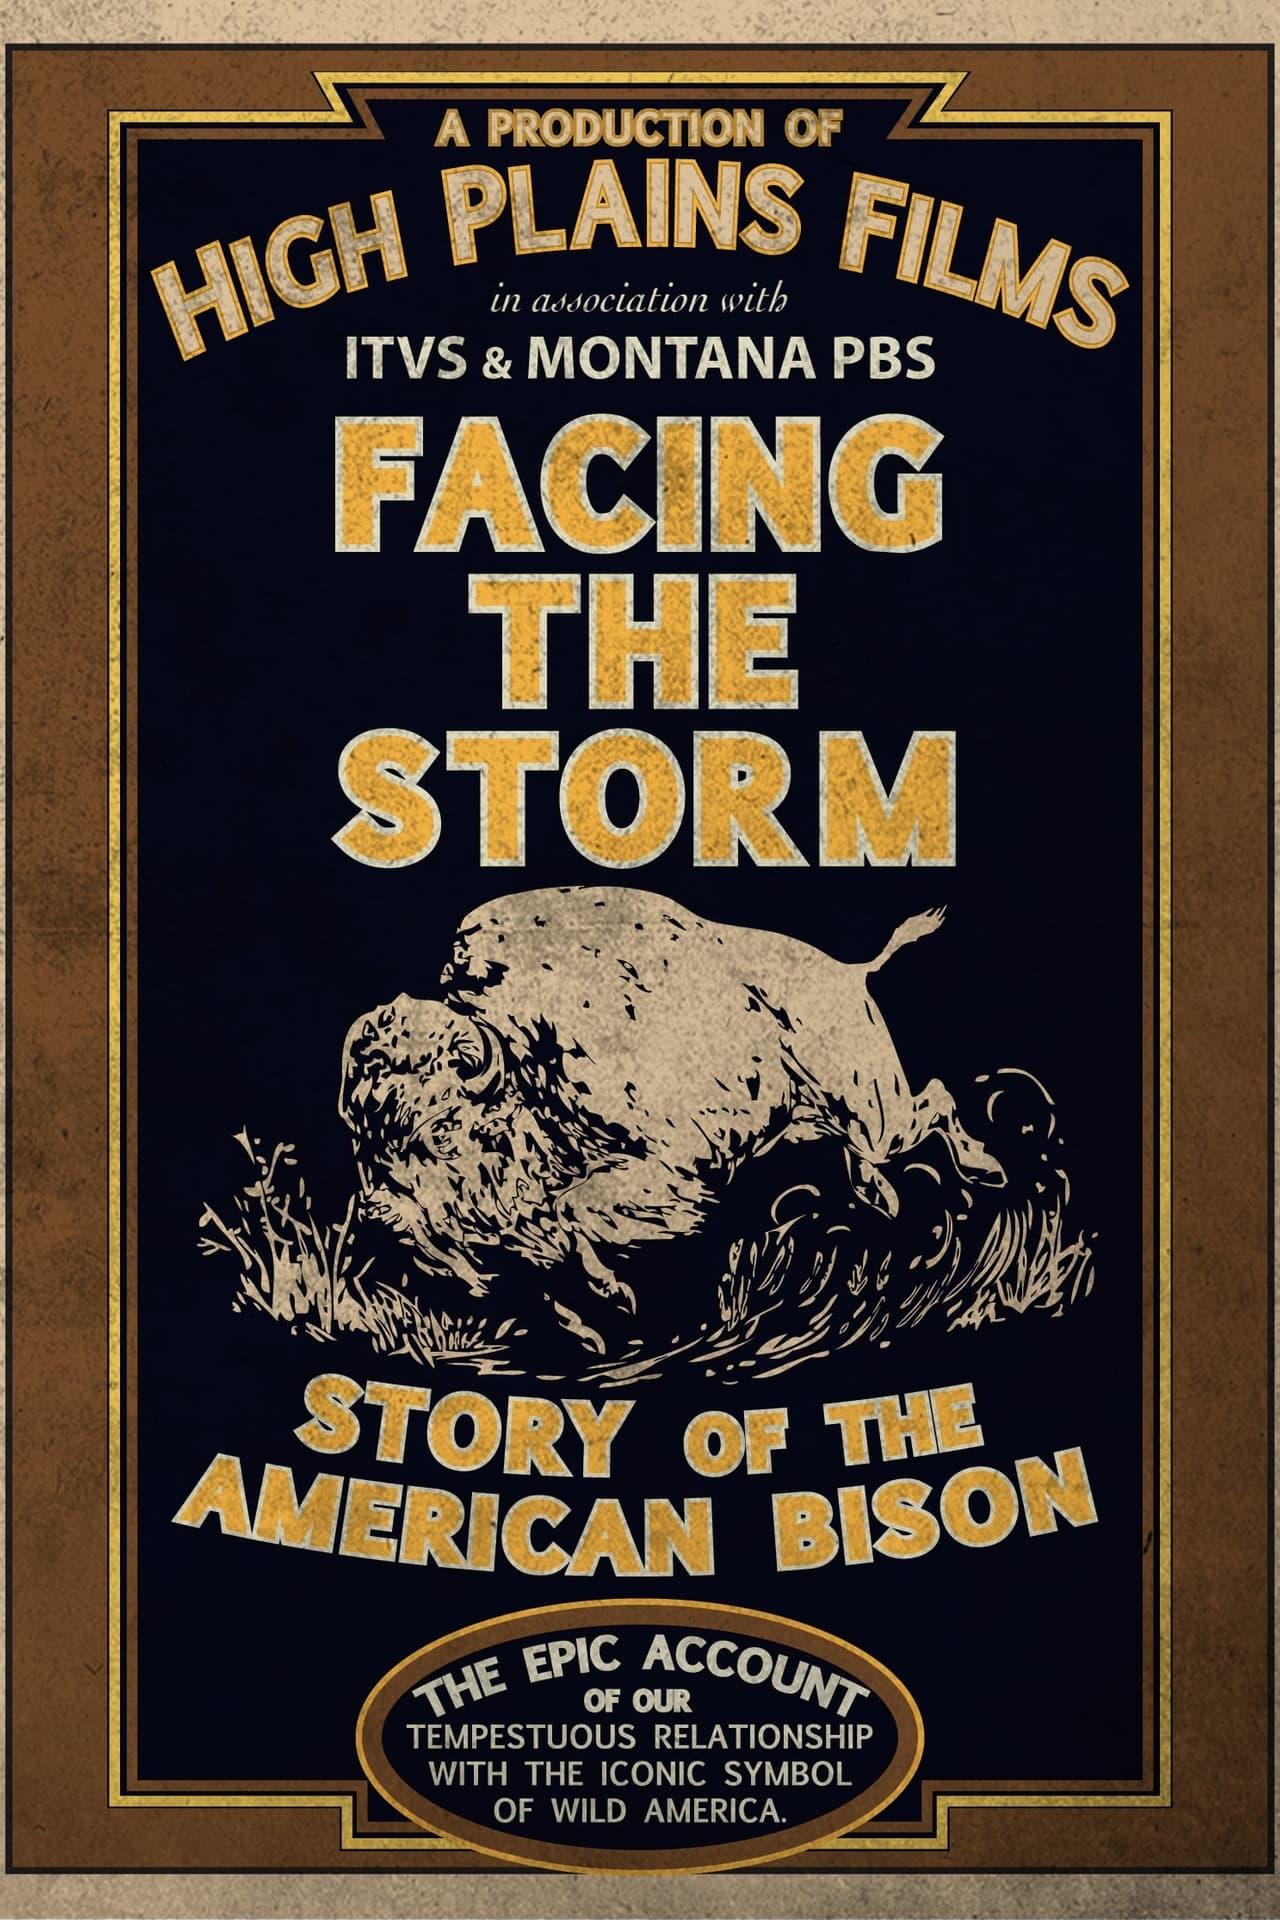 Facing the Storm: Story of the American Bison poster